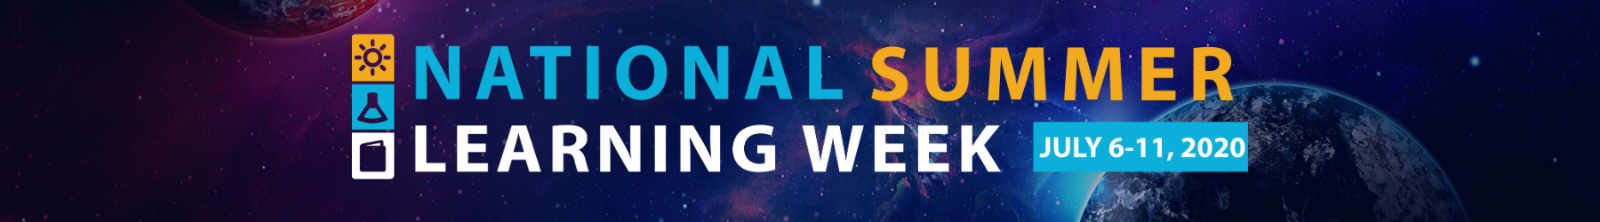 National Summer Learning Week is July 6-11, 2020